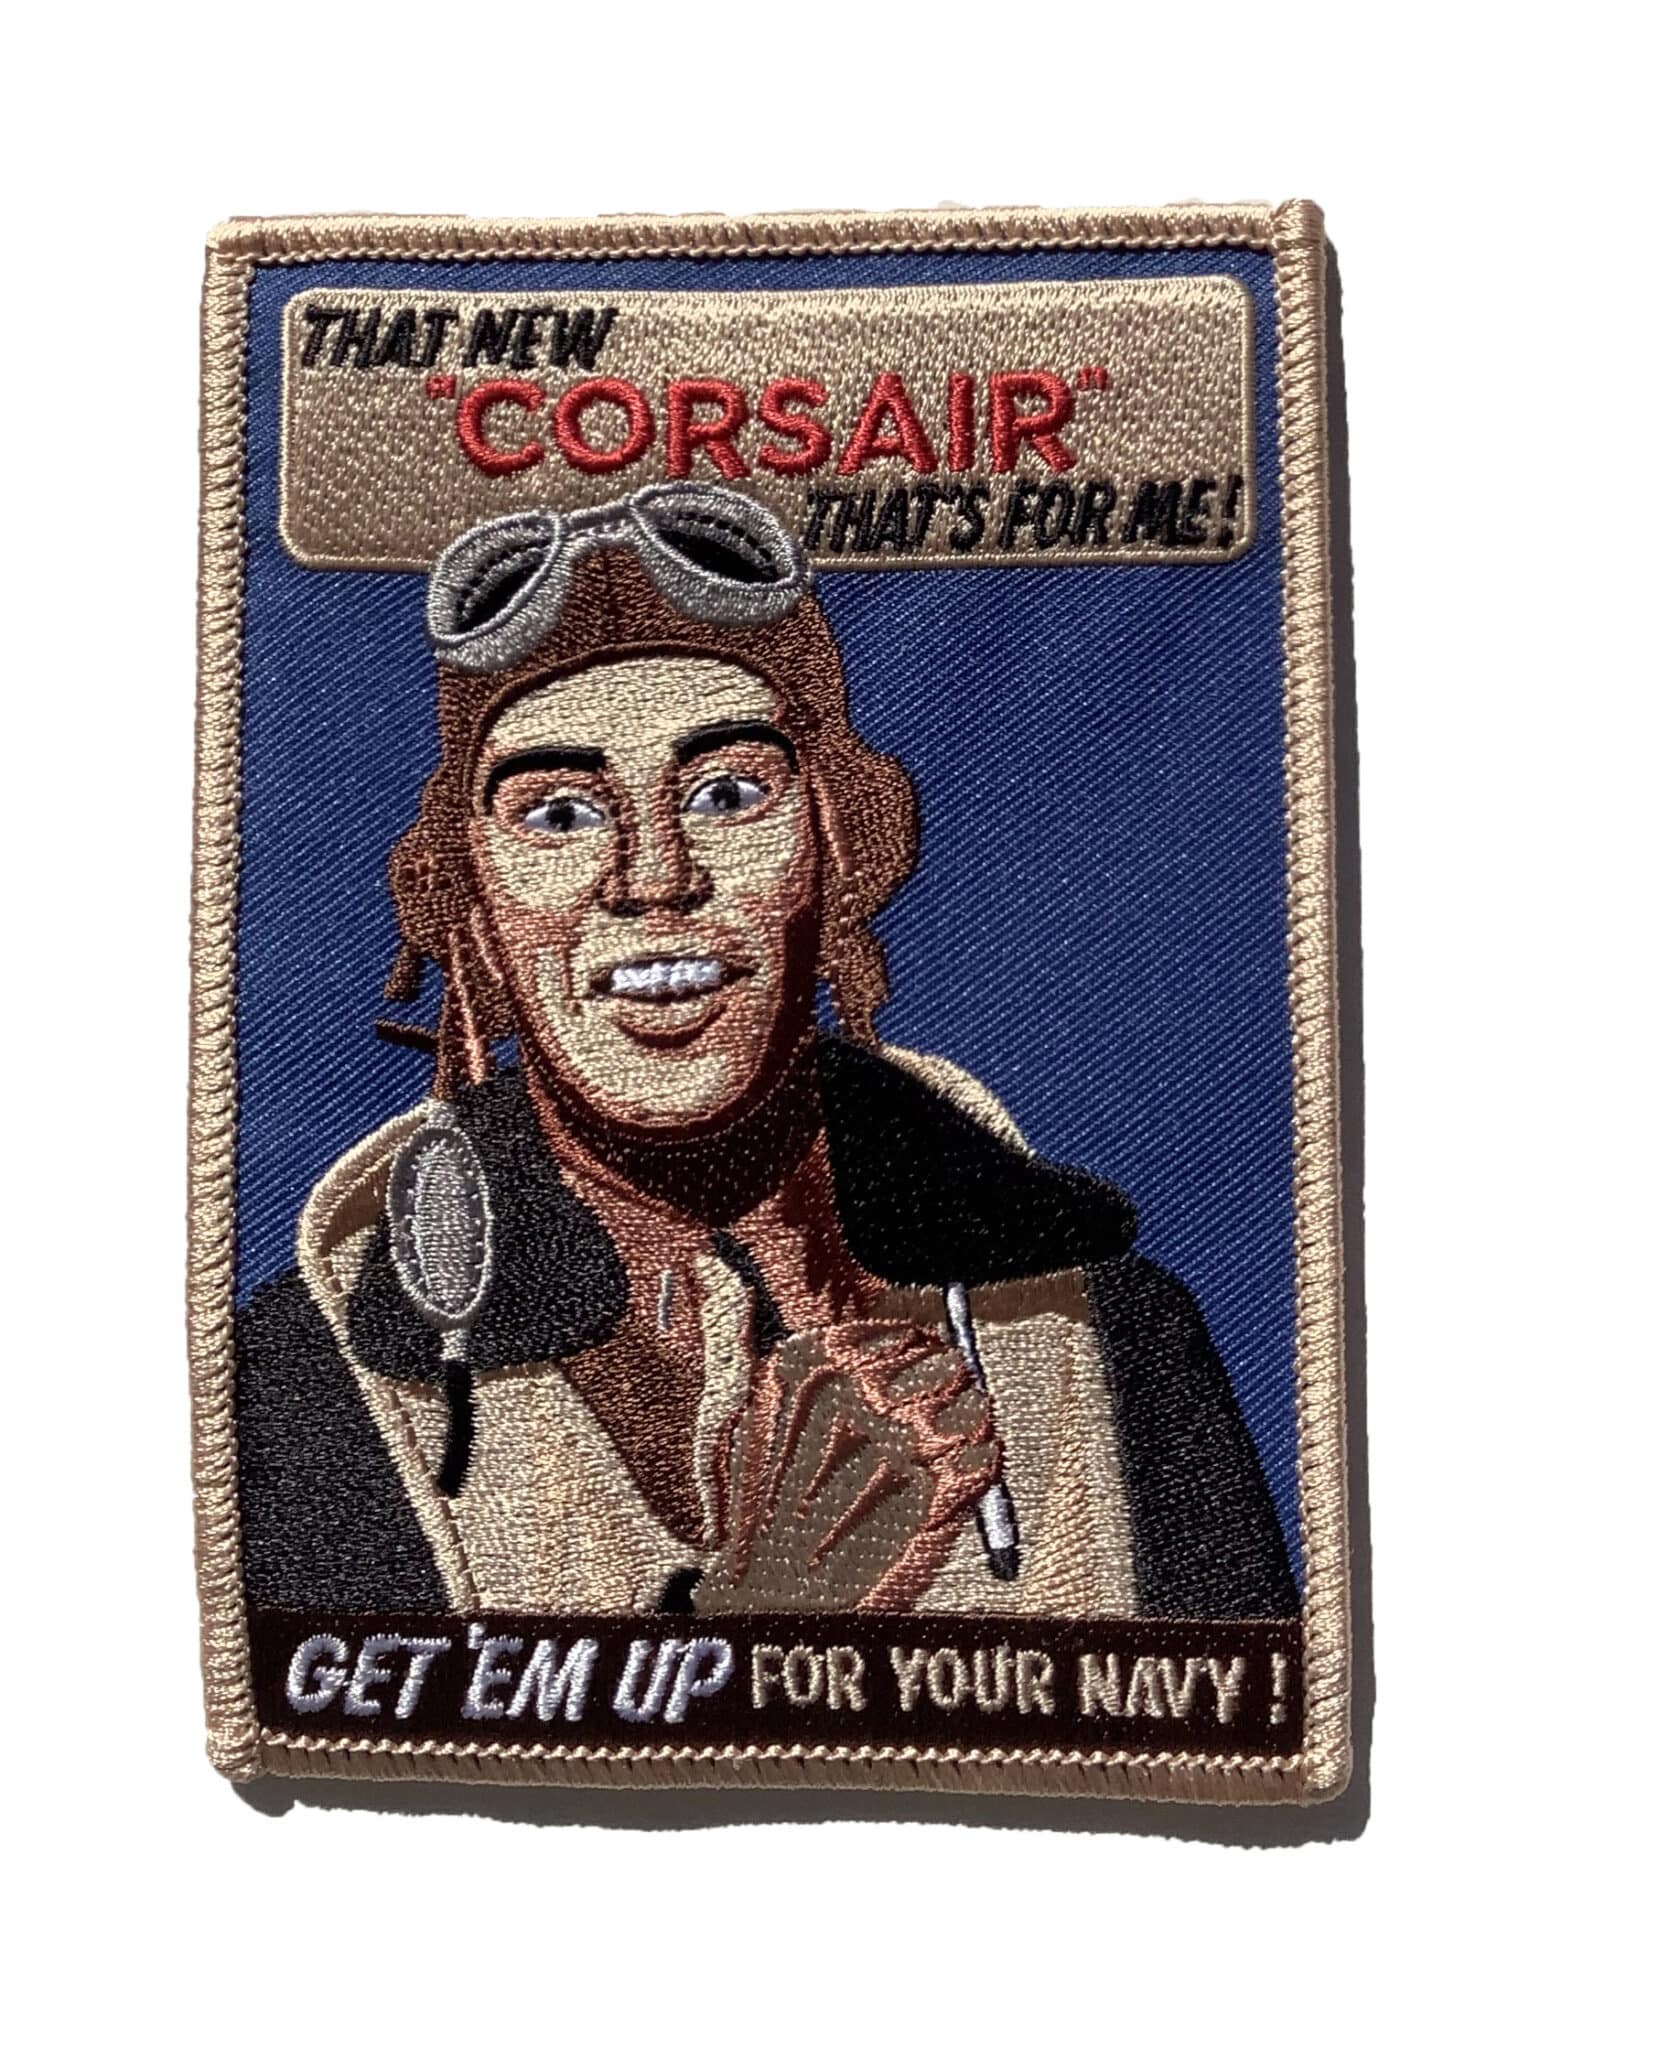 That New Corsair! Get Em Up for the Navy Patch - Squadron Nostalgia